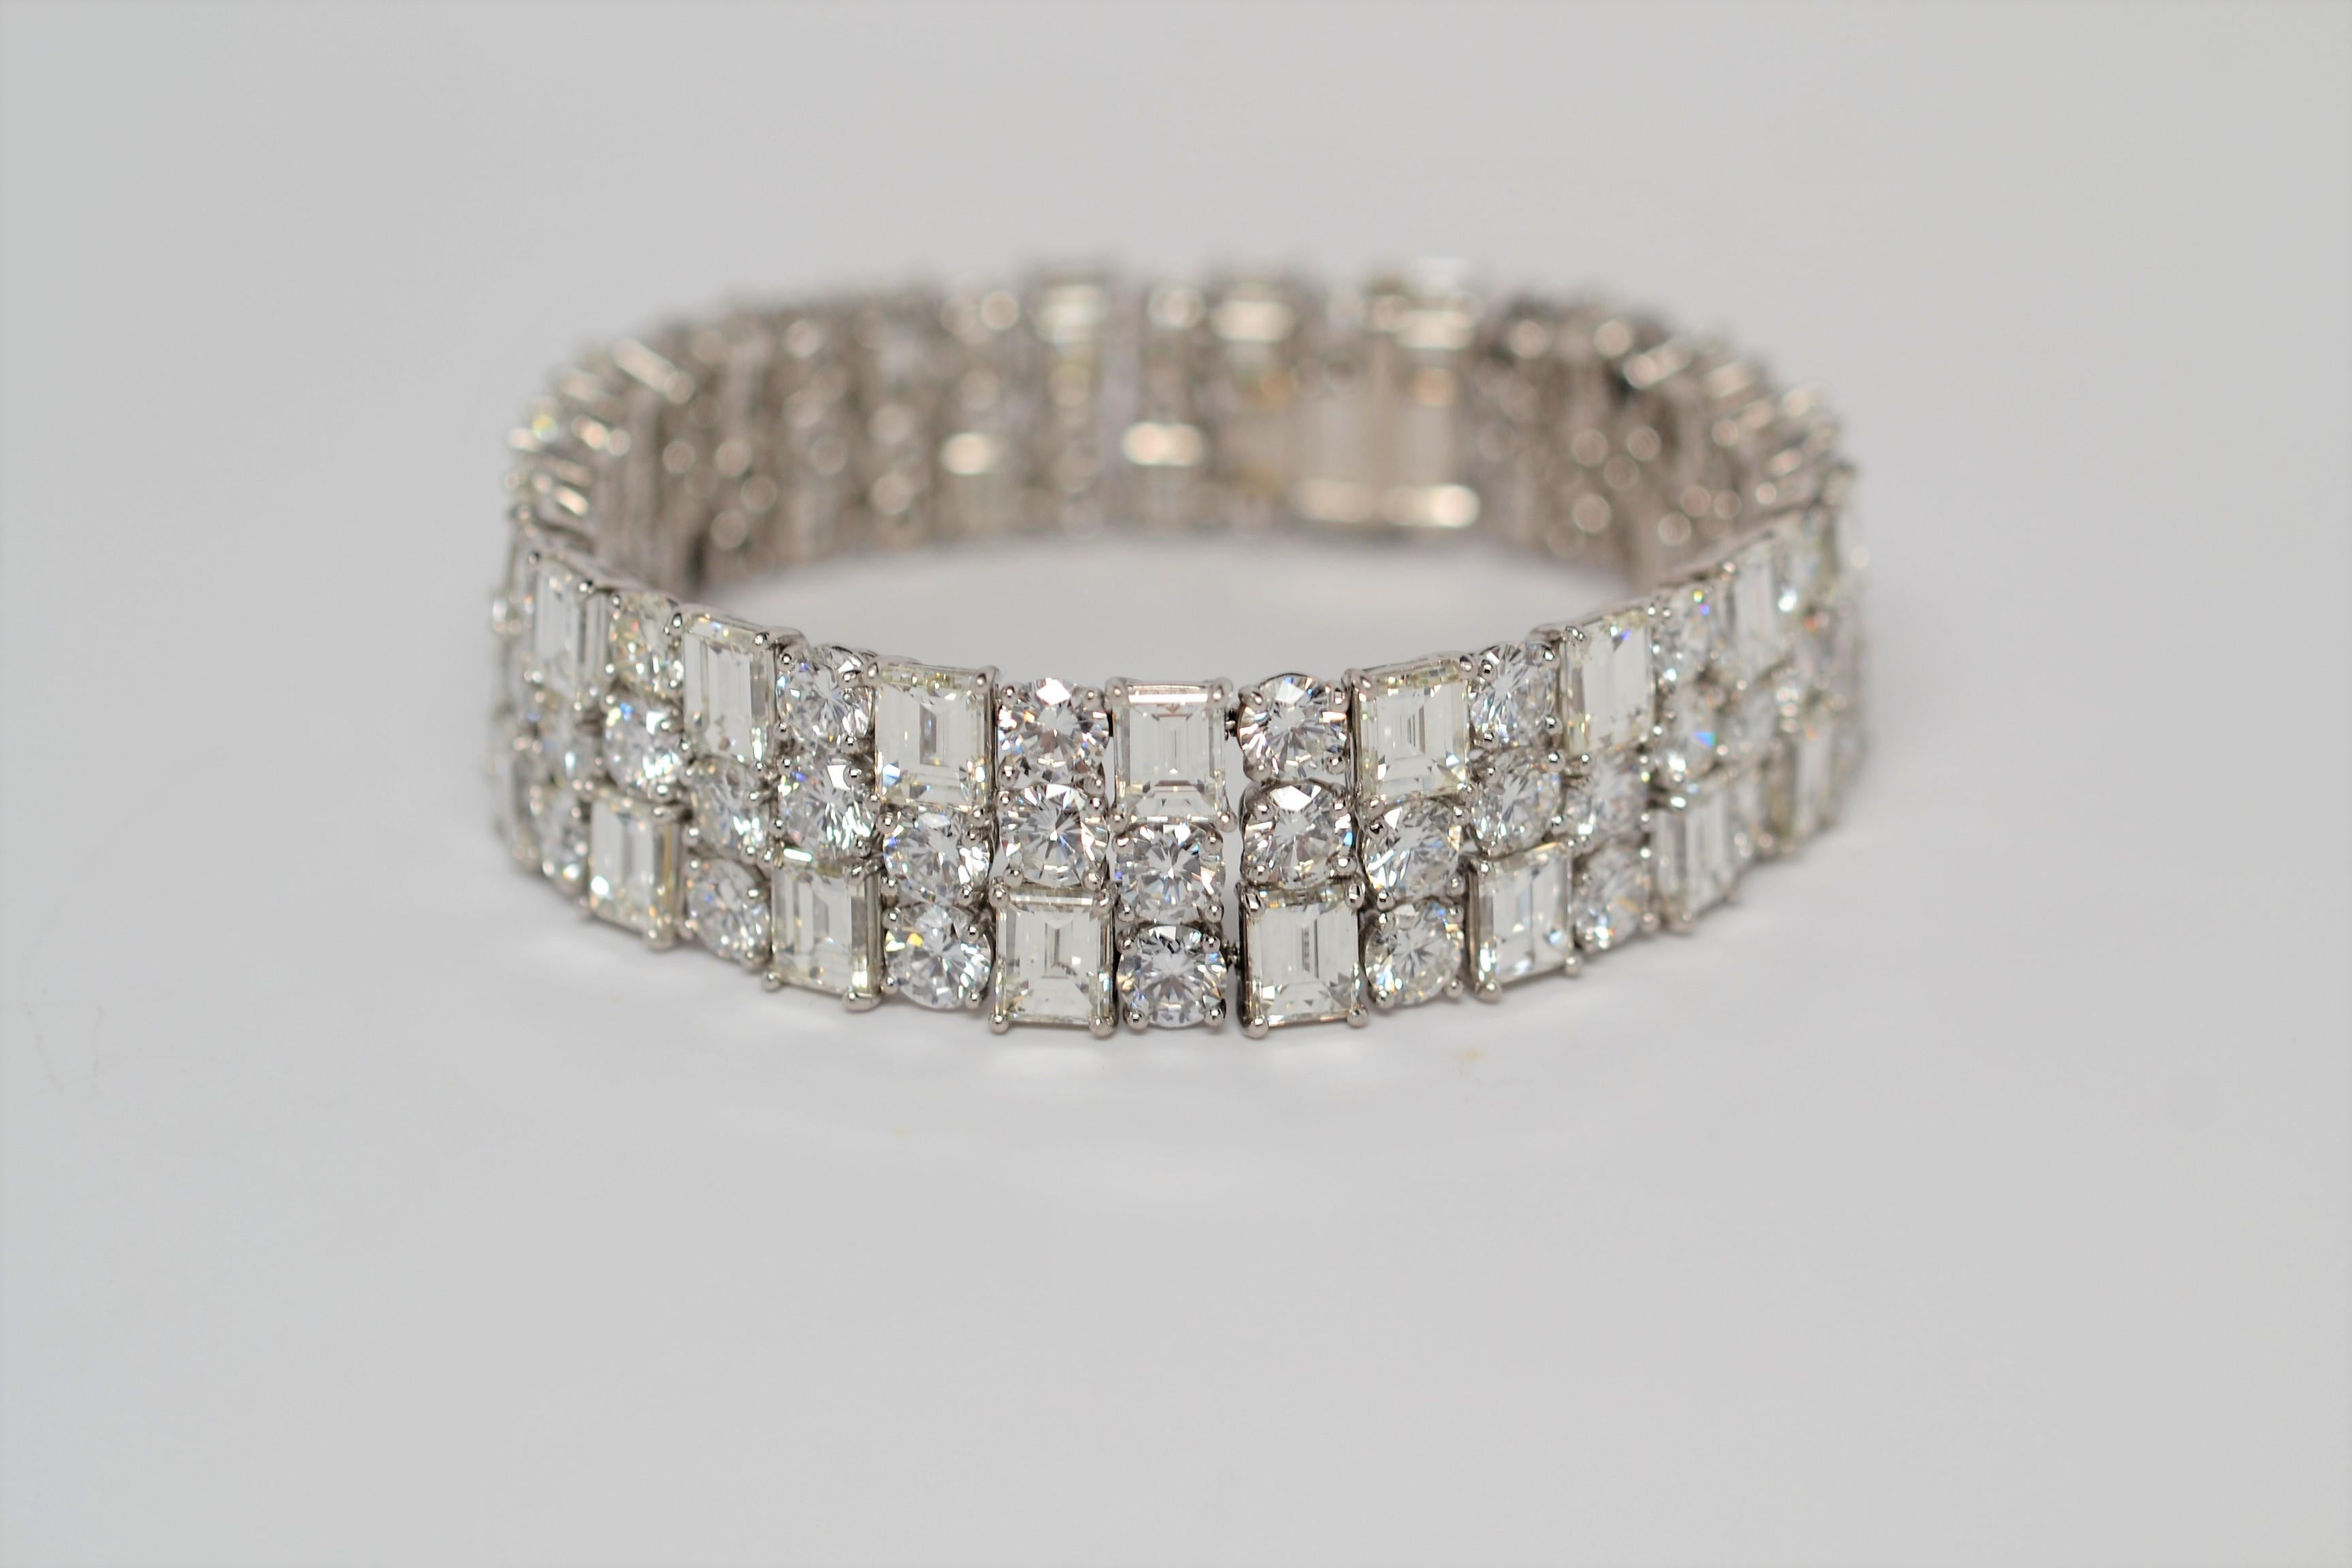 Platinum Bracelet with Emerald Cut & Round Brilliant Cut Diamonds, 53.61 Carats In New Condition For Sale In New York, NY